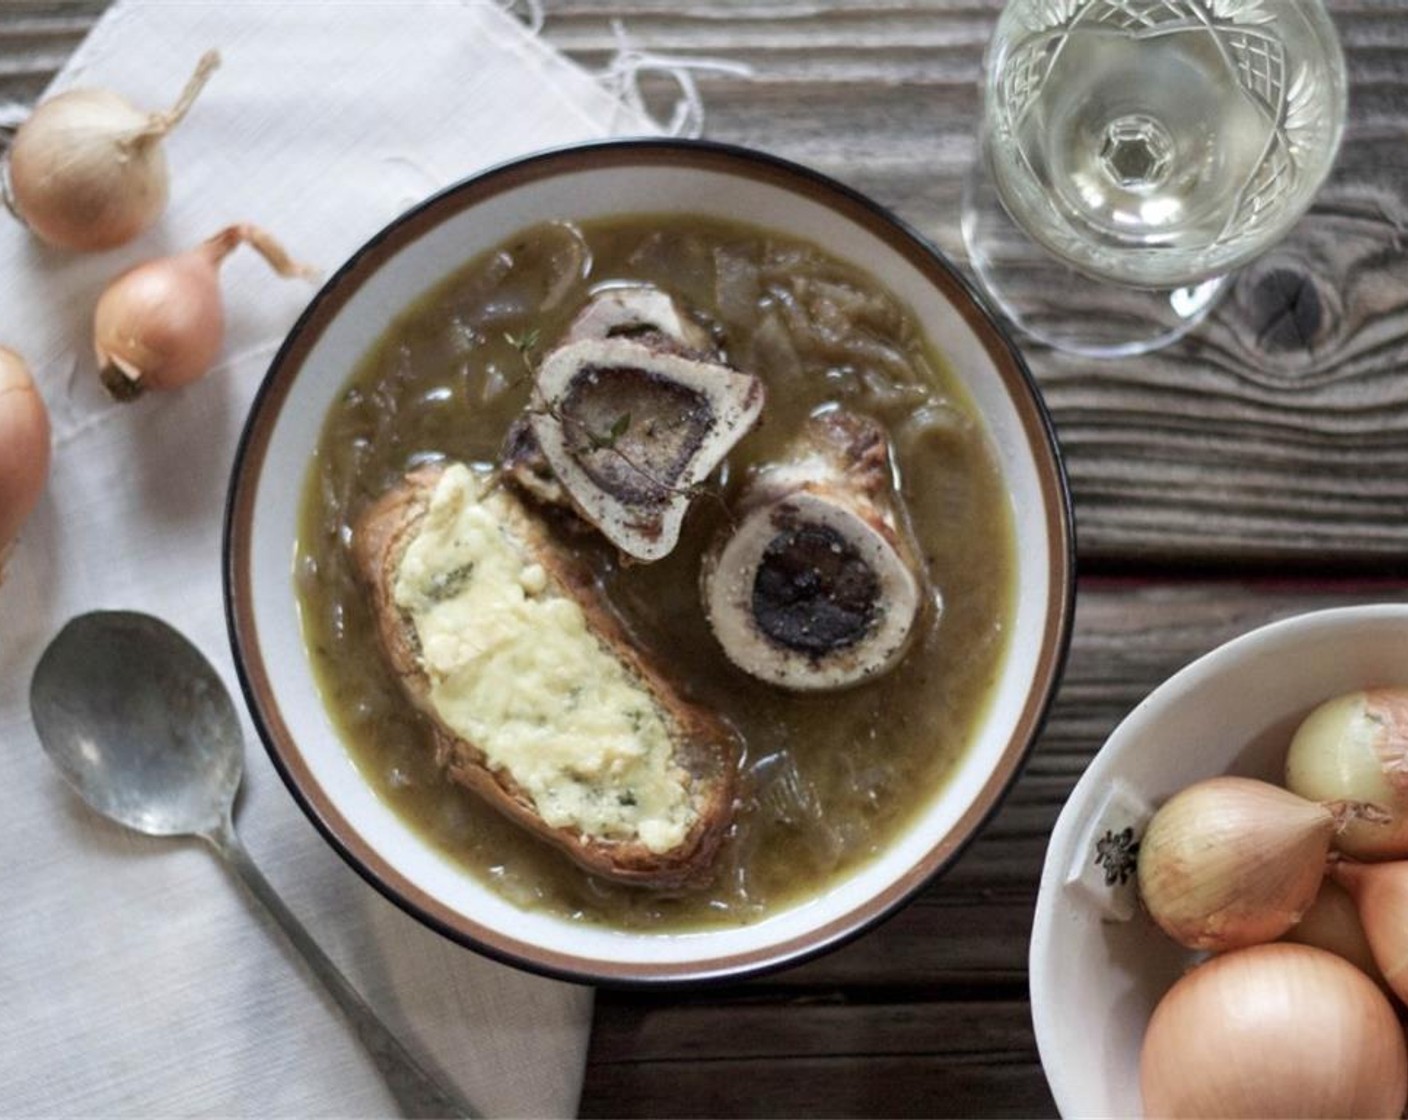 step 5 Either serve bone marrow as a starter with melba toast or as part of the soup along with a slice of toasted sourdough topped with melted Gruyere or Stilton. Enjoy!